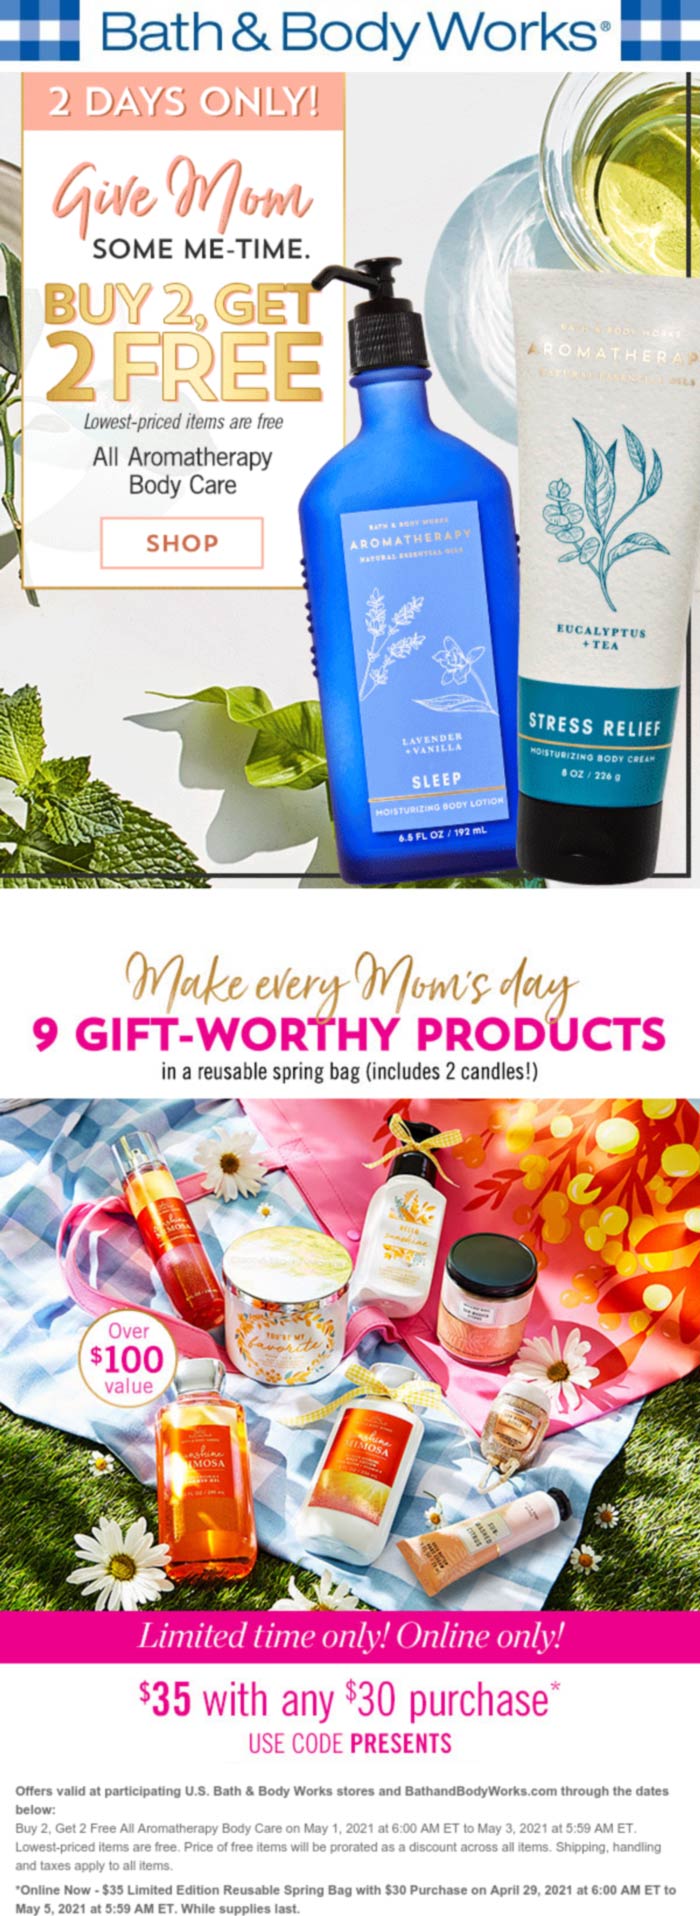 Bath & Body Works stores Coupon  4-for-2 on body care & more at Bath & Body Works, ditto online #bathbodyworks 